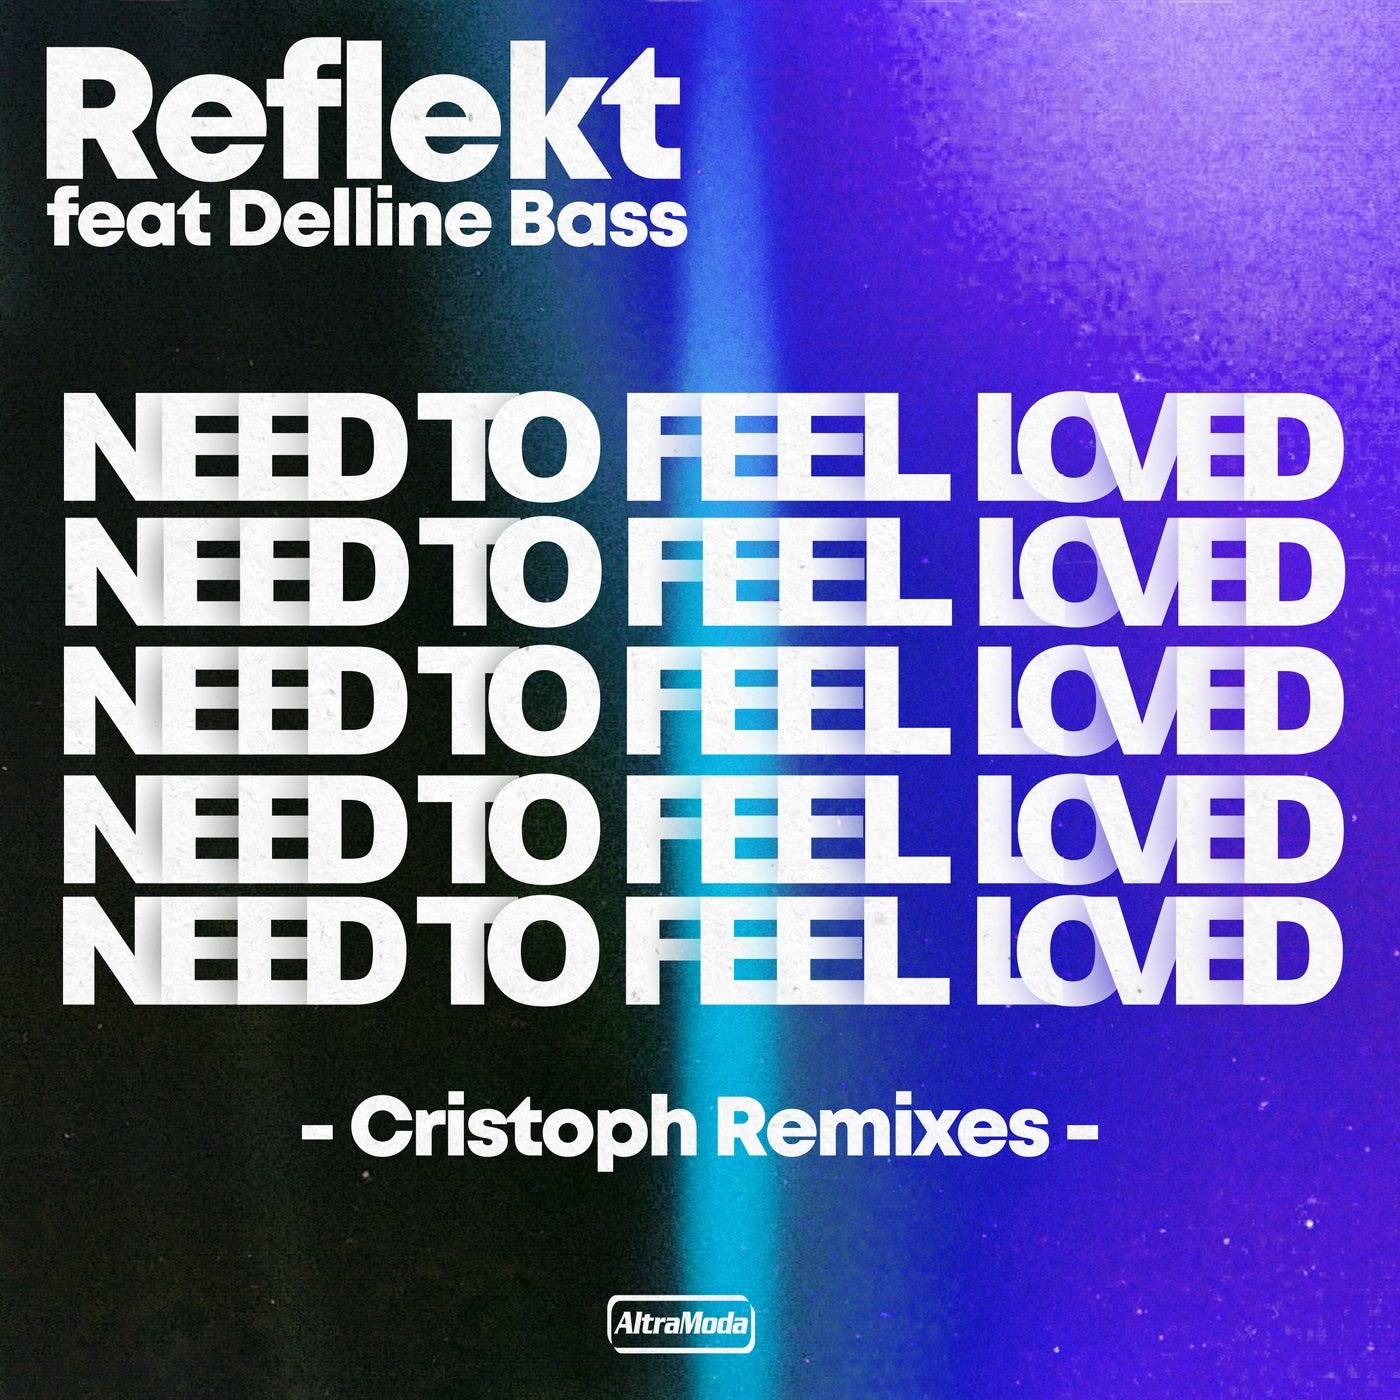 Reflekt, Delline Bass - Need To Feel Loved - Cristoph Remix [AMM628]